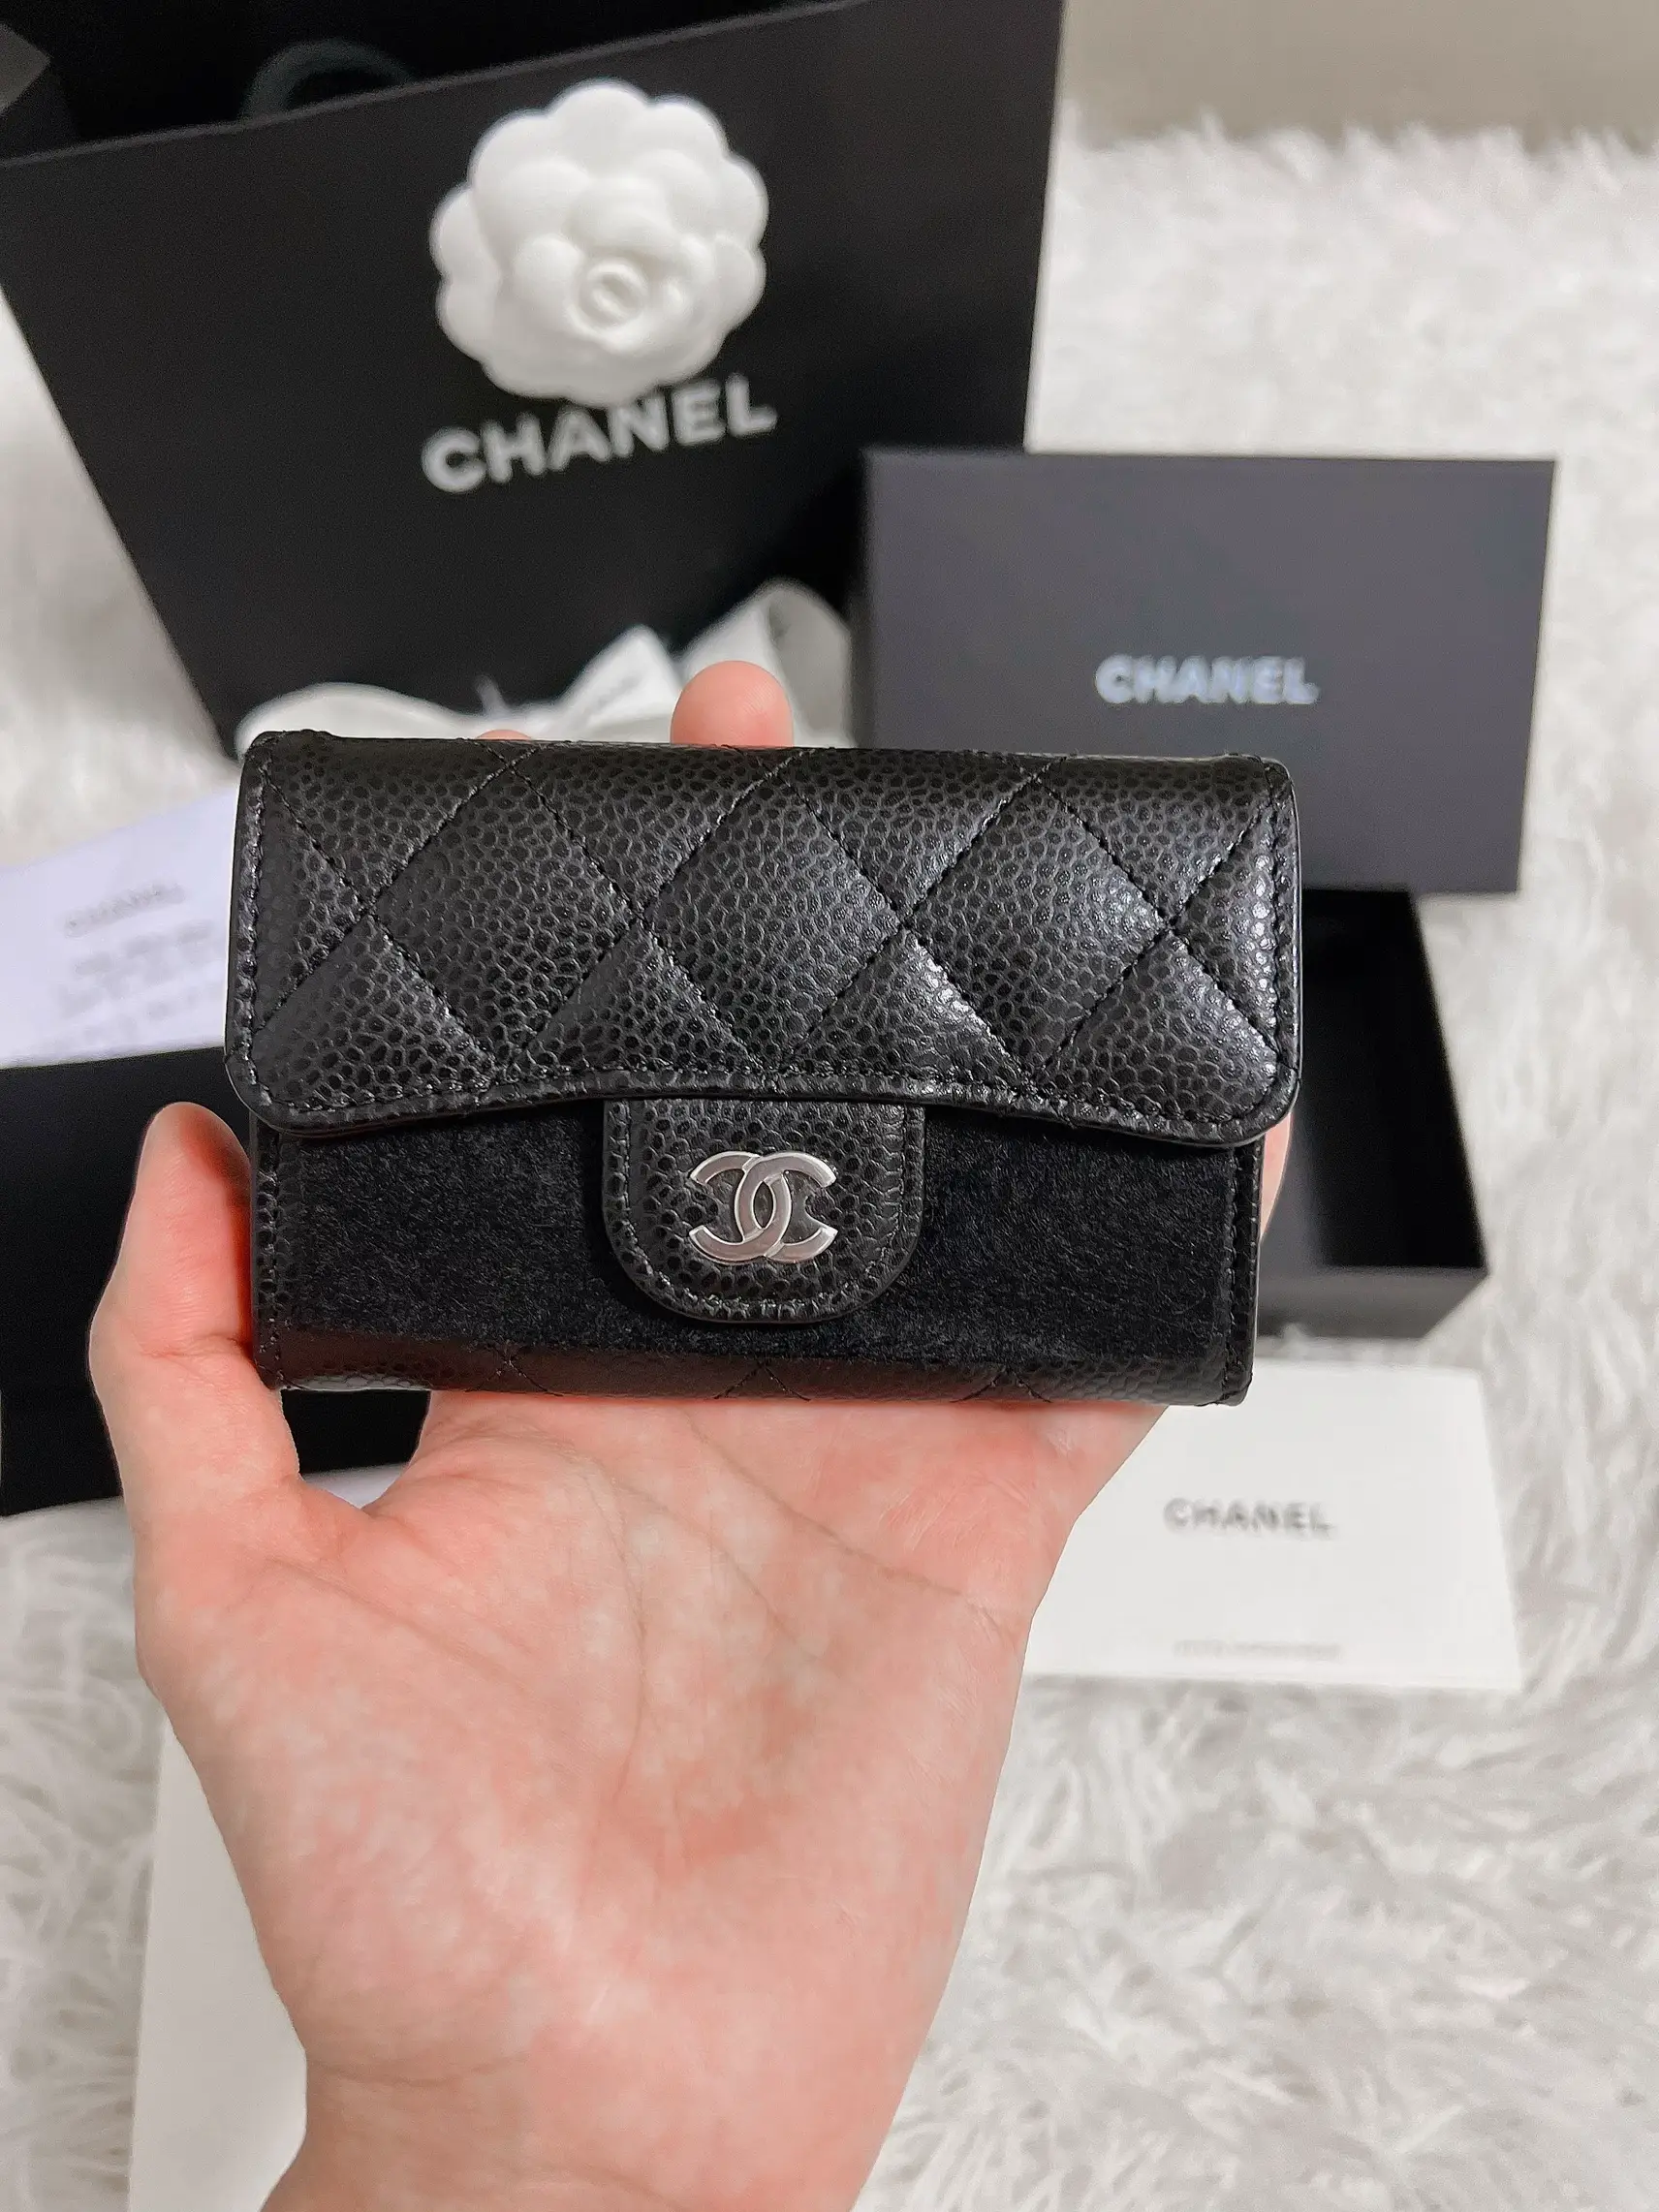 Review of Chanel Classic Card Holder Rare Mother Must Have, Gallery posted  by Kannathip T